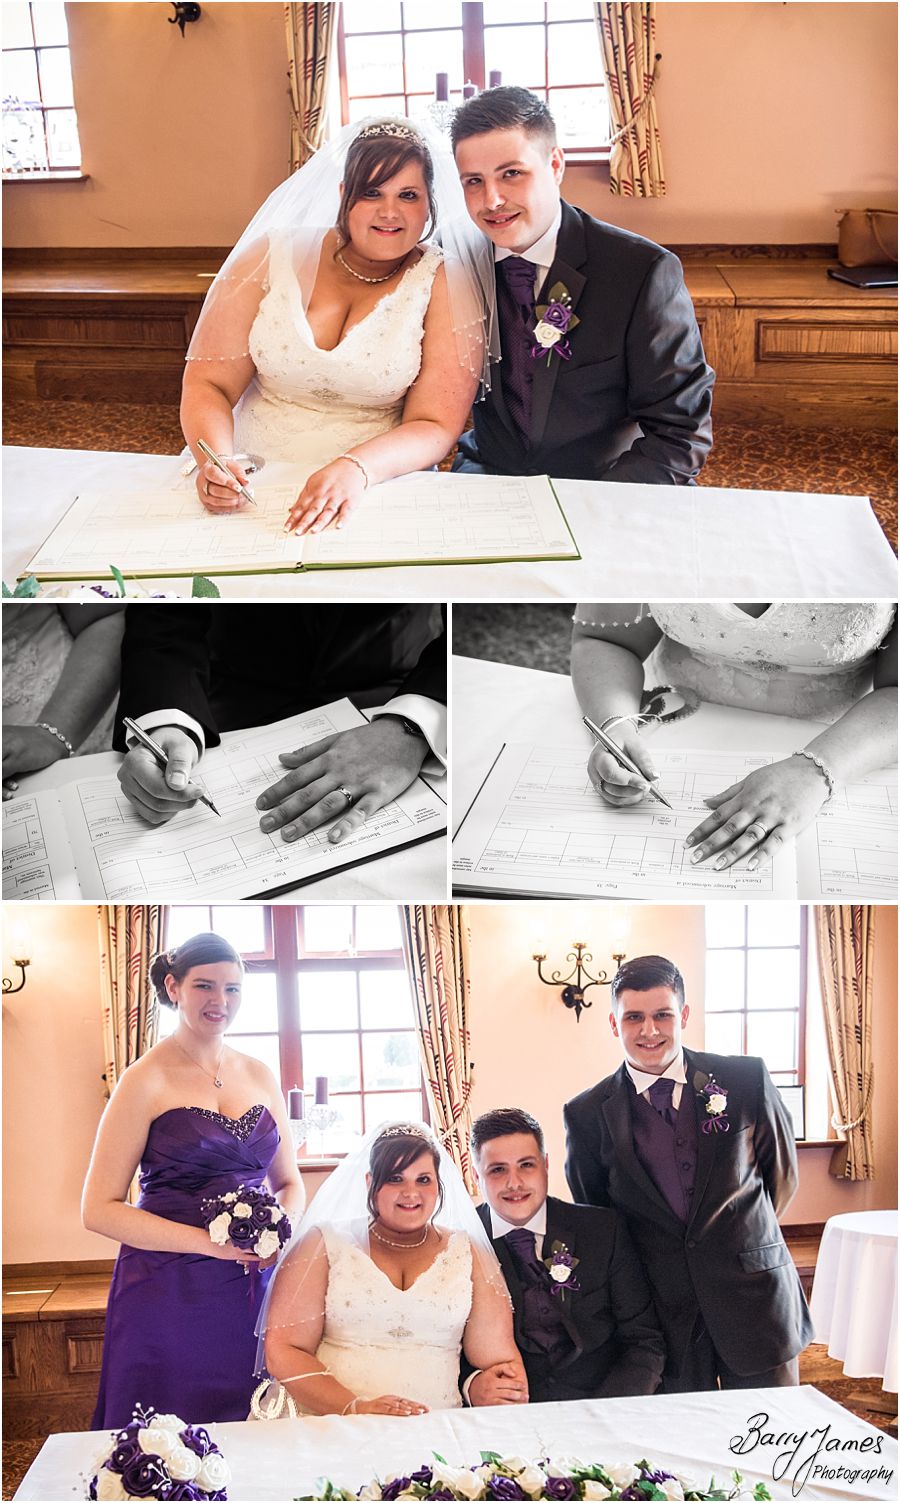 Capturing the emotion and story of the civil wedding at The Waterfront in Barton Marina by Burton-on-Trent Professional Wedding Photographer Barry James